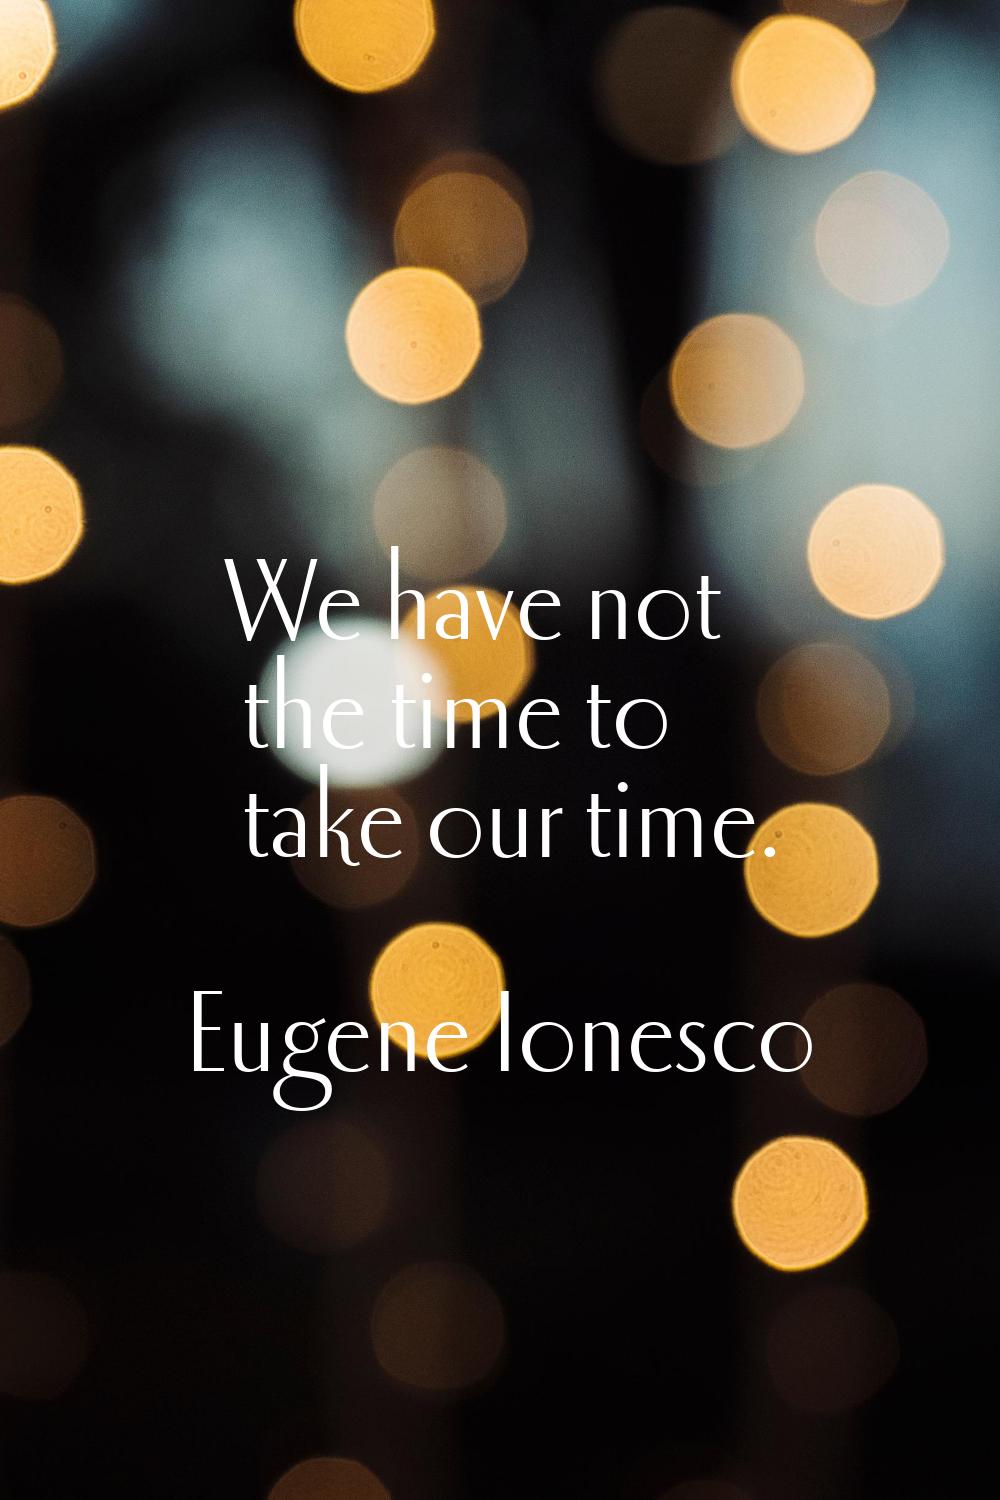 We have not the time to take our time.